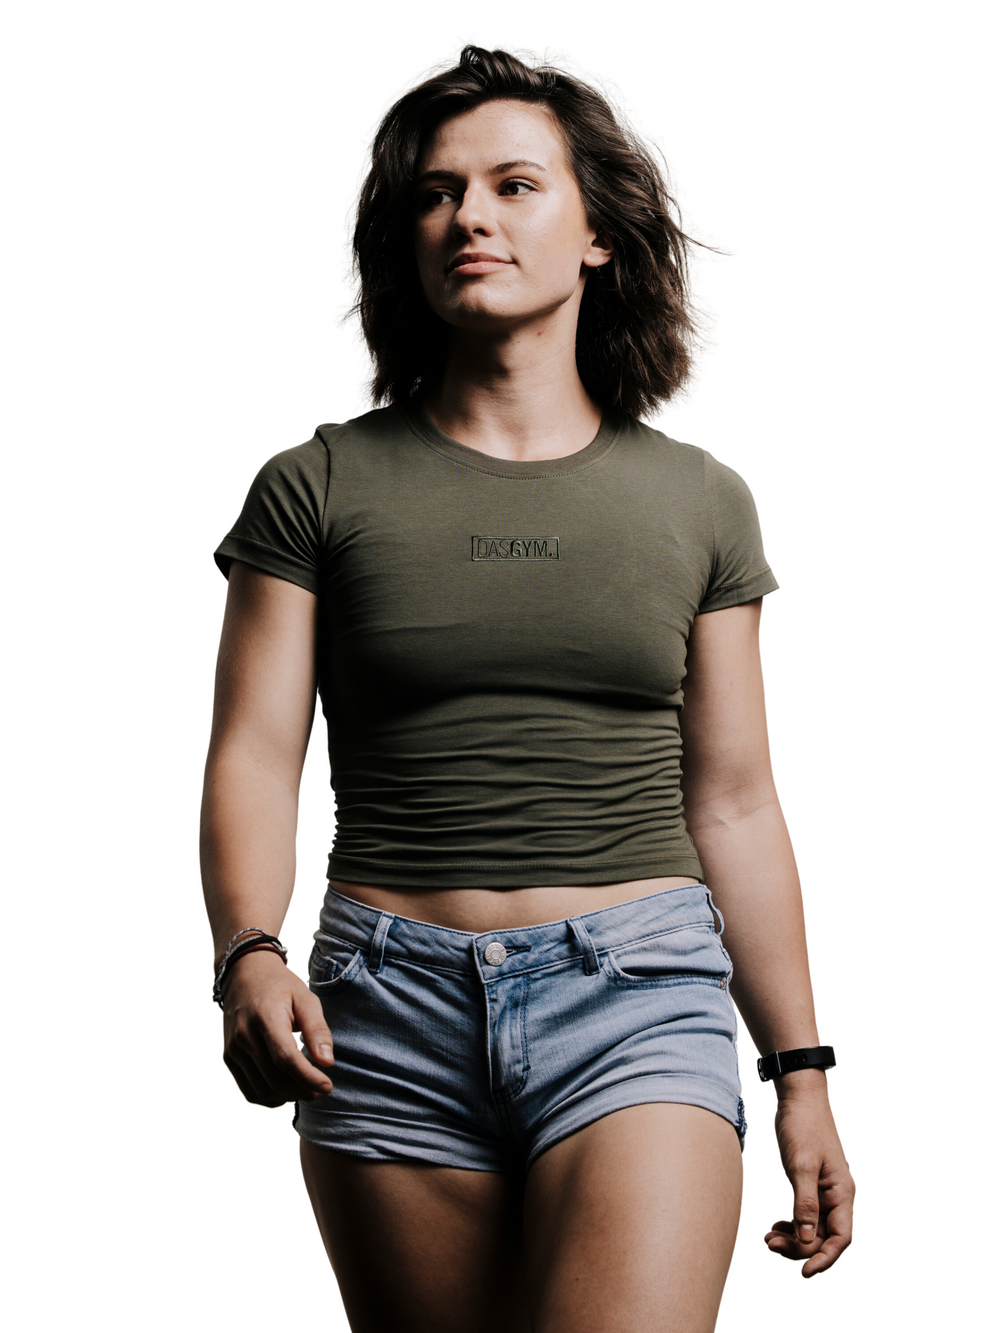 DASGYM. Crop Top - MILITARY GREEN